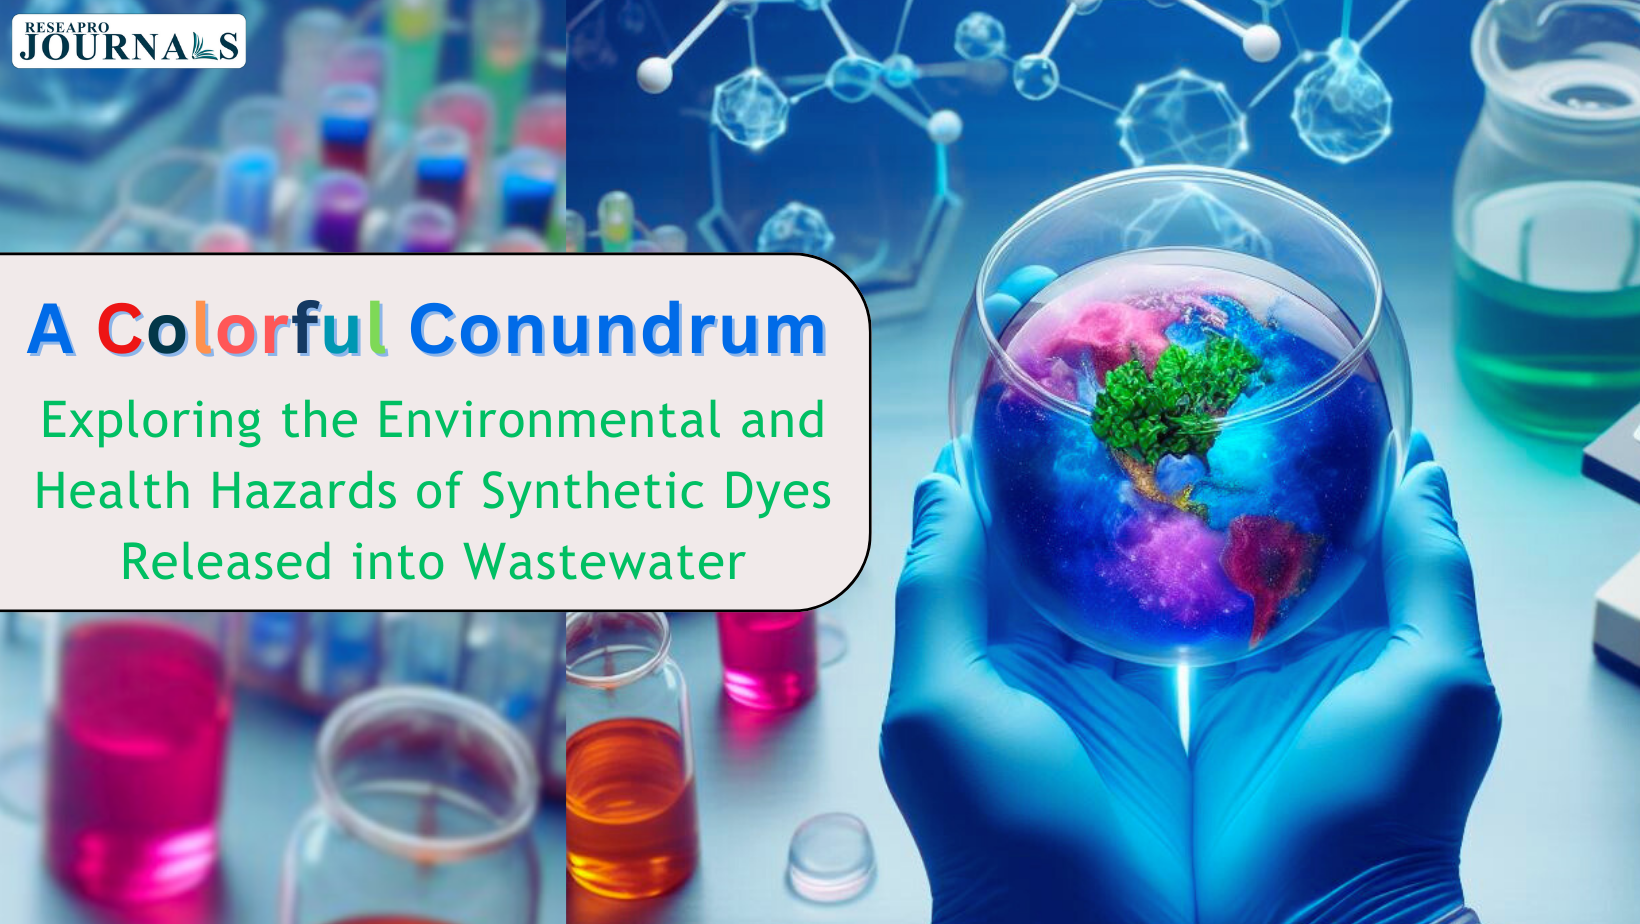 A Colorful Conundrum: Exploring the Environmental and Health Hazards of Synthetic Dyes Released into Wastewater